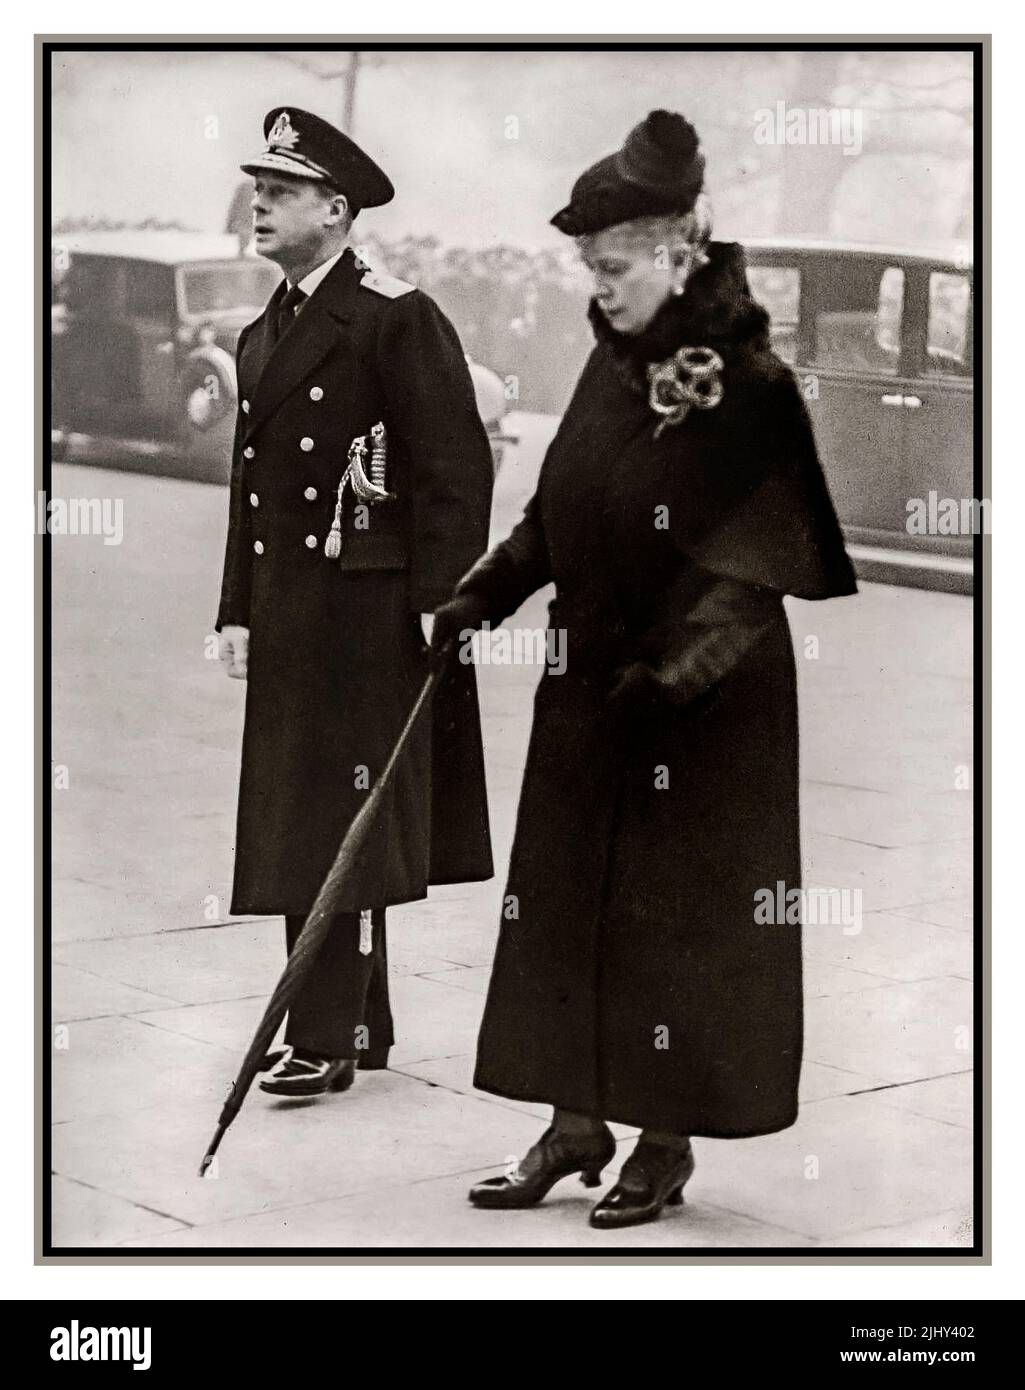 Queen Mary and King Edward VIII (later the Duke of Windsor) visit the commemoration of the end of WWI in London on 11 November 1936. The arrival of the King and his mother in Whitehall for the laying of a wreath. This is the last photo of the king in an official function. He will abdicate on 11 December 1936. Date 11 November 1936 Stock Photo